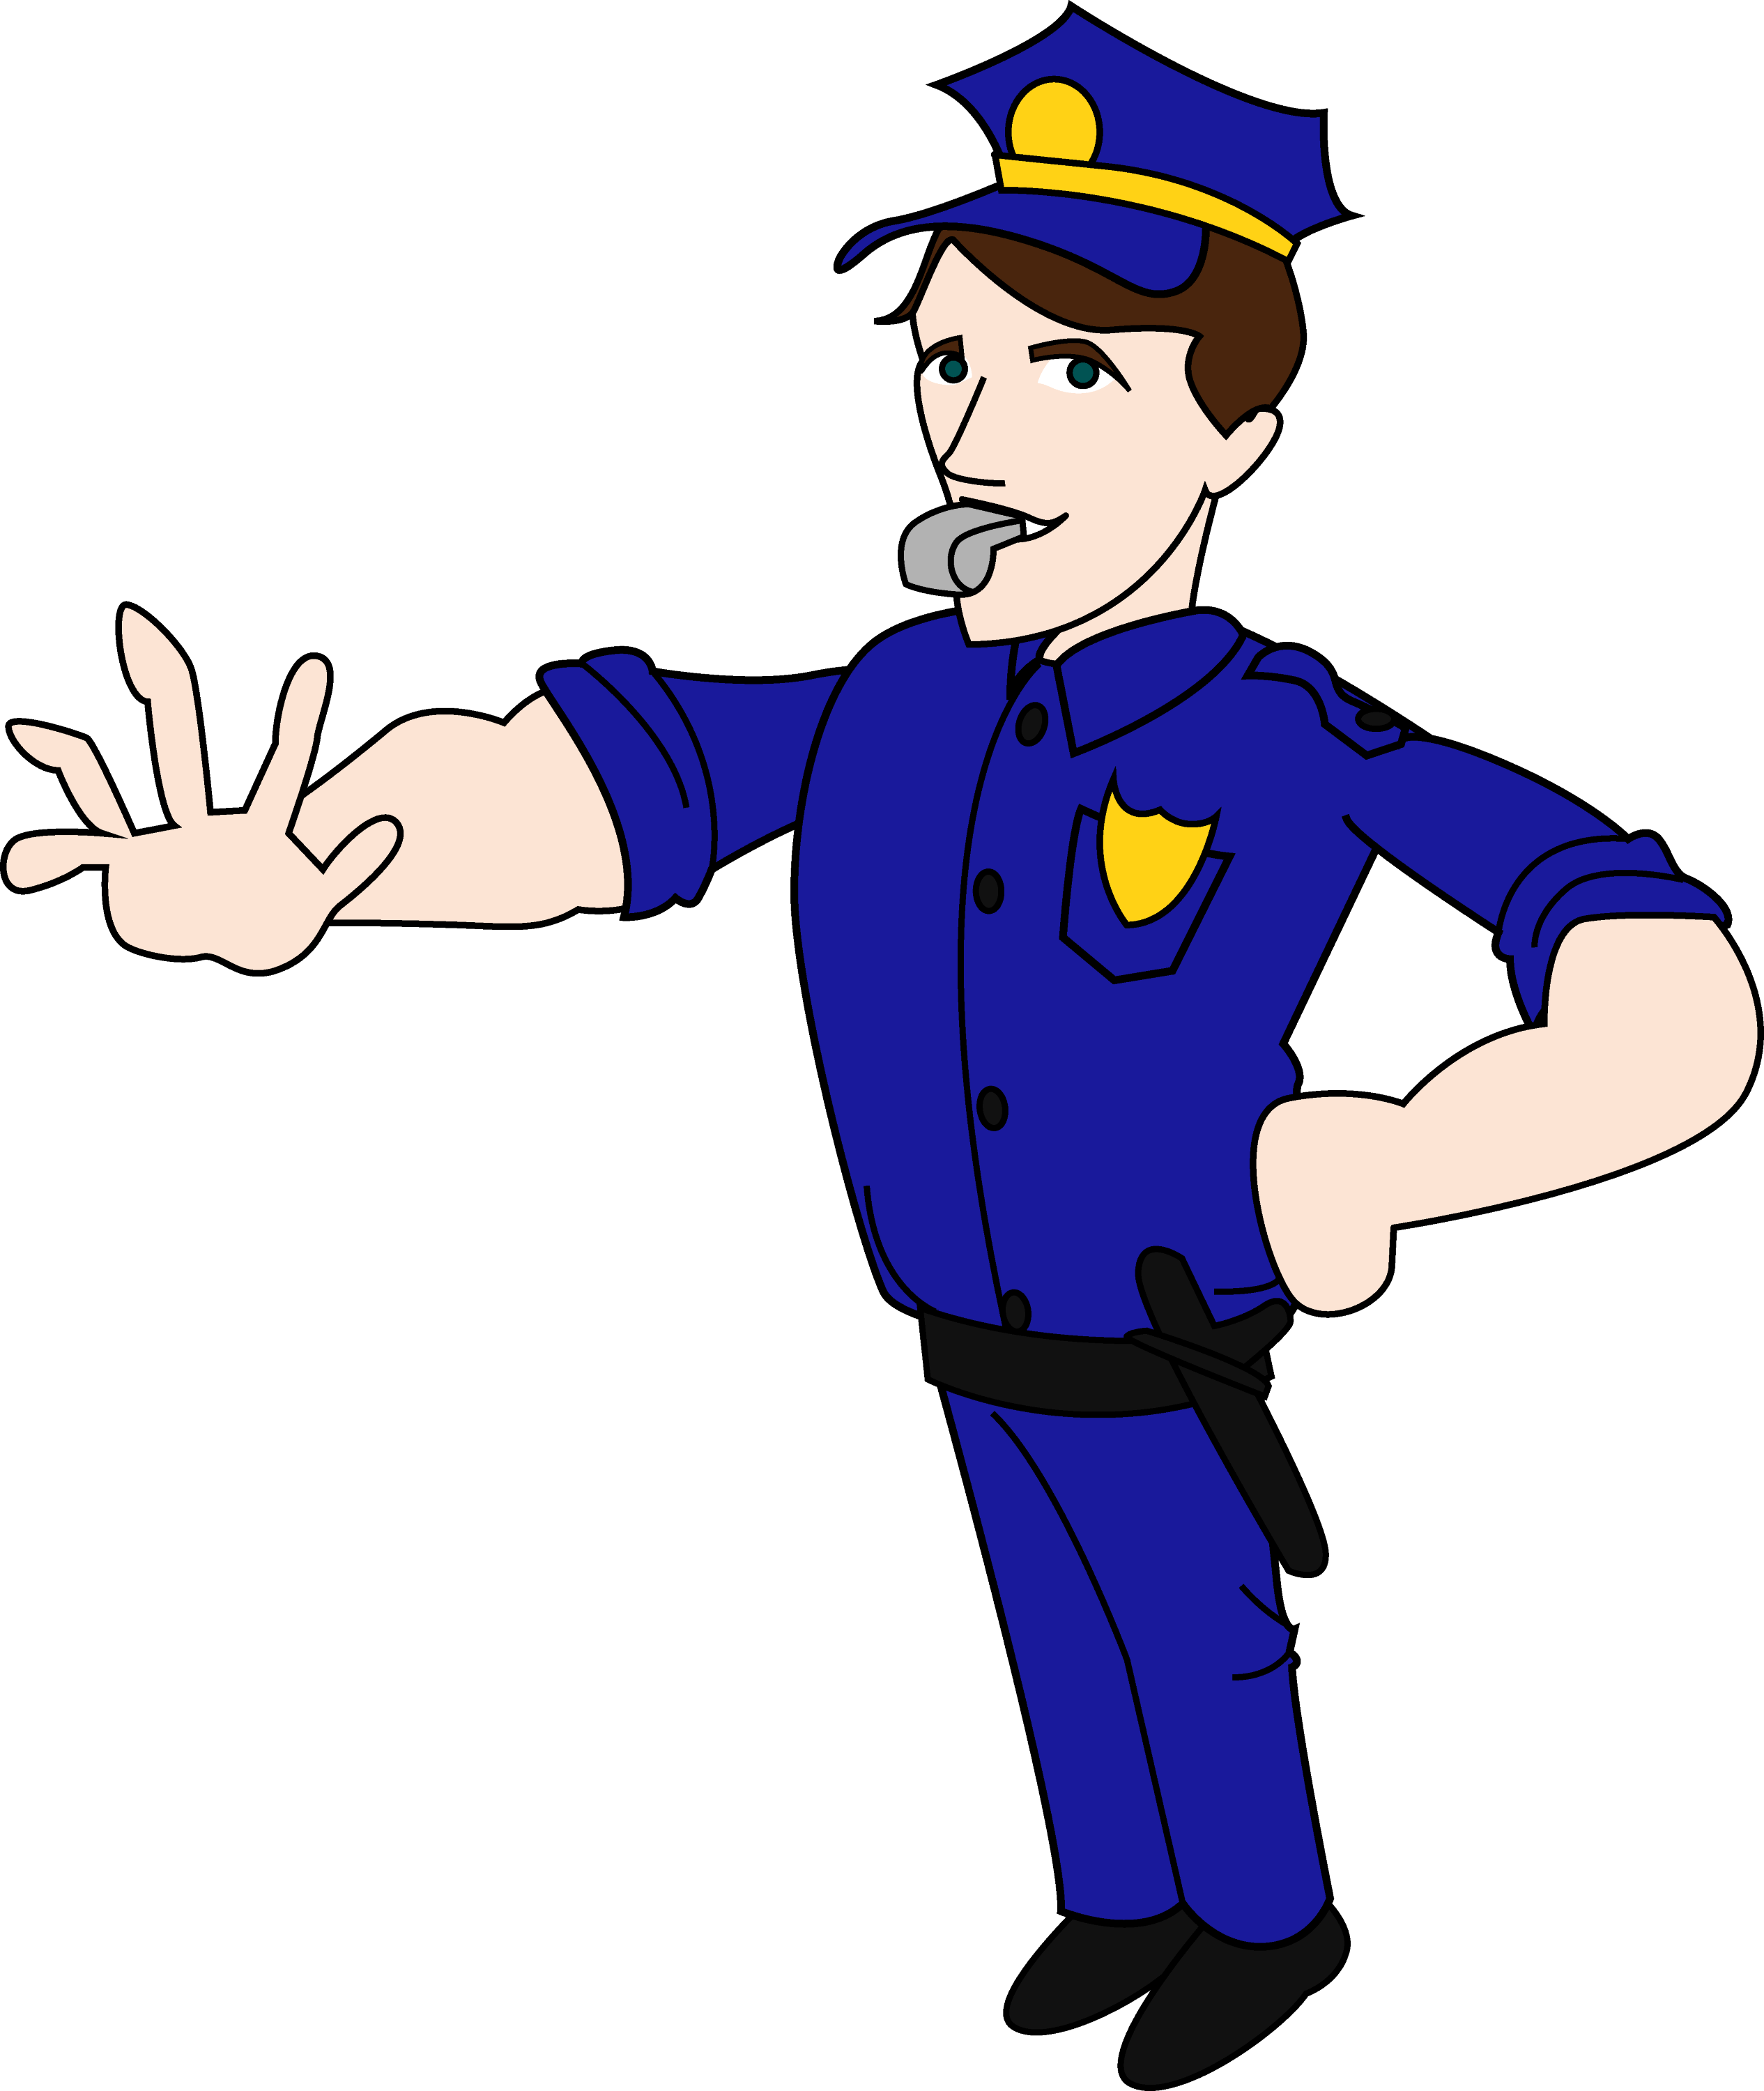 clip art images police officer - photo #5